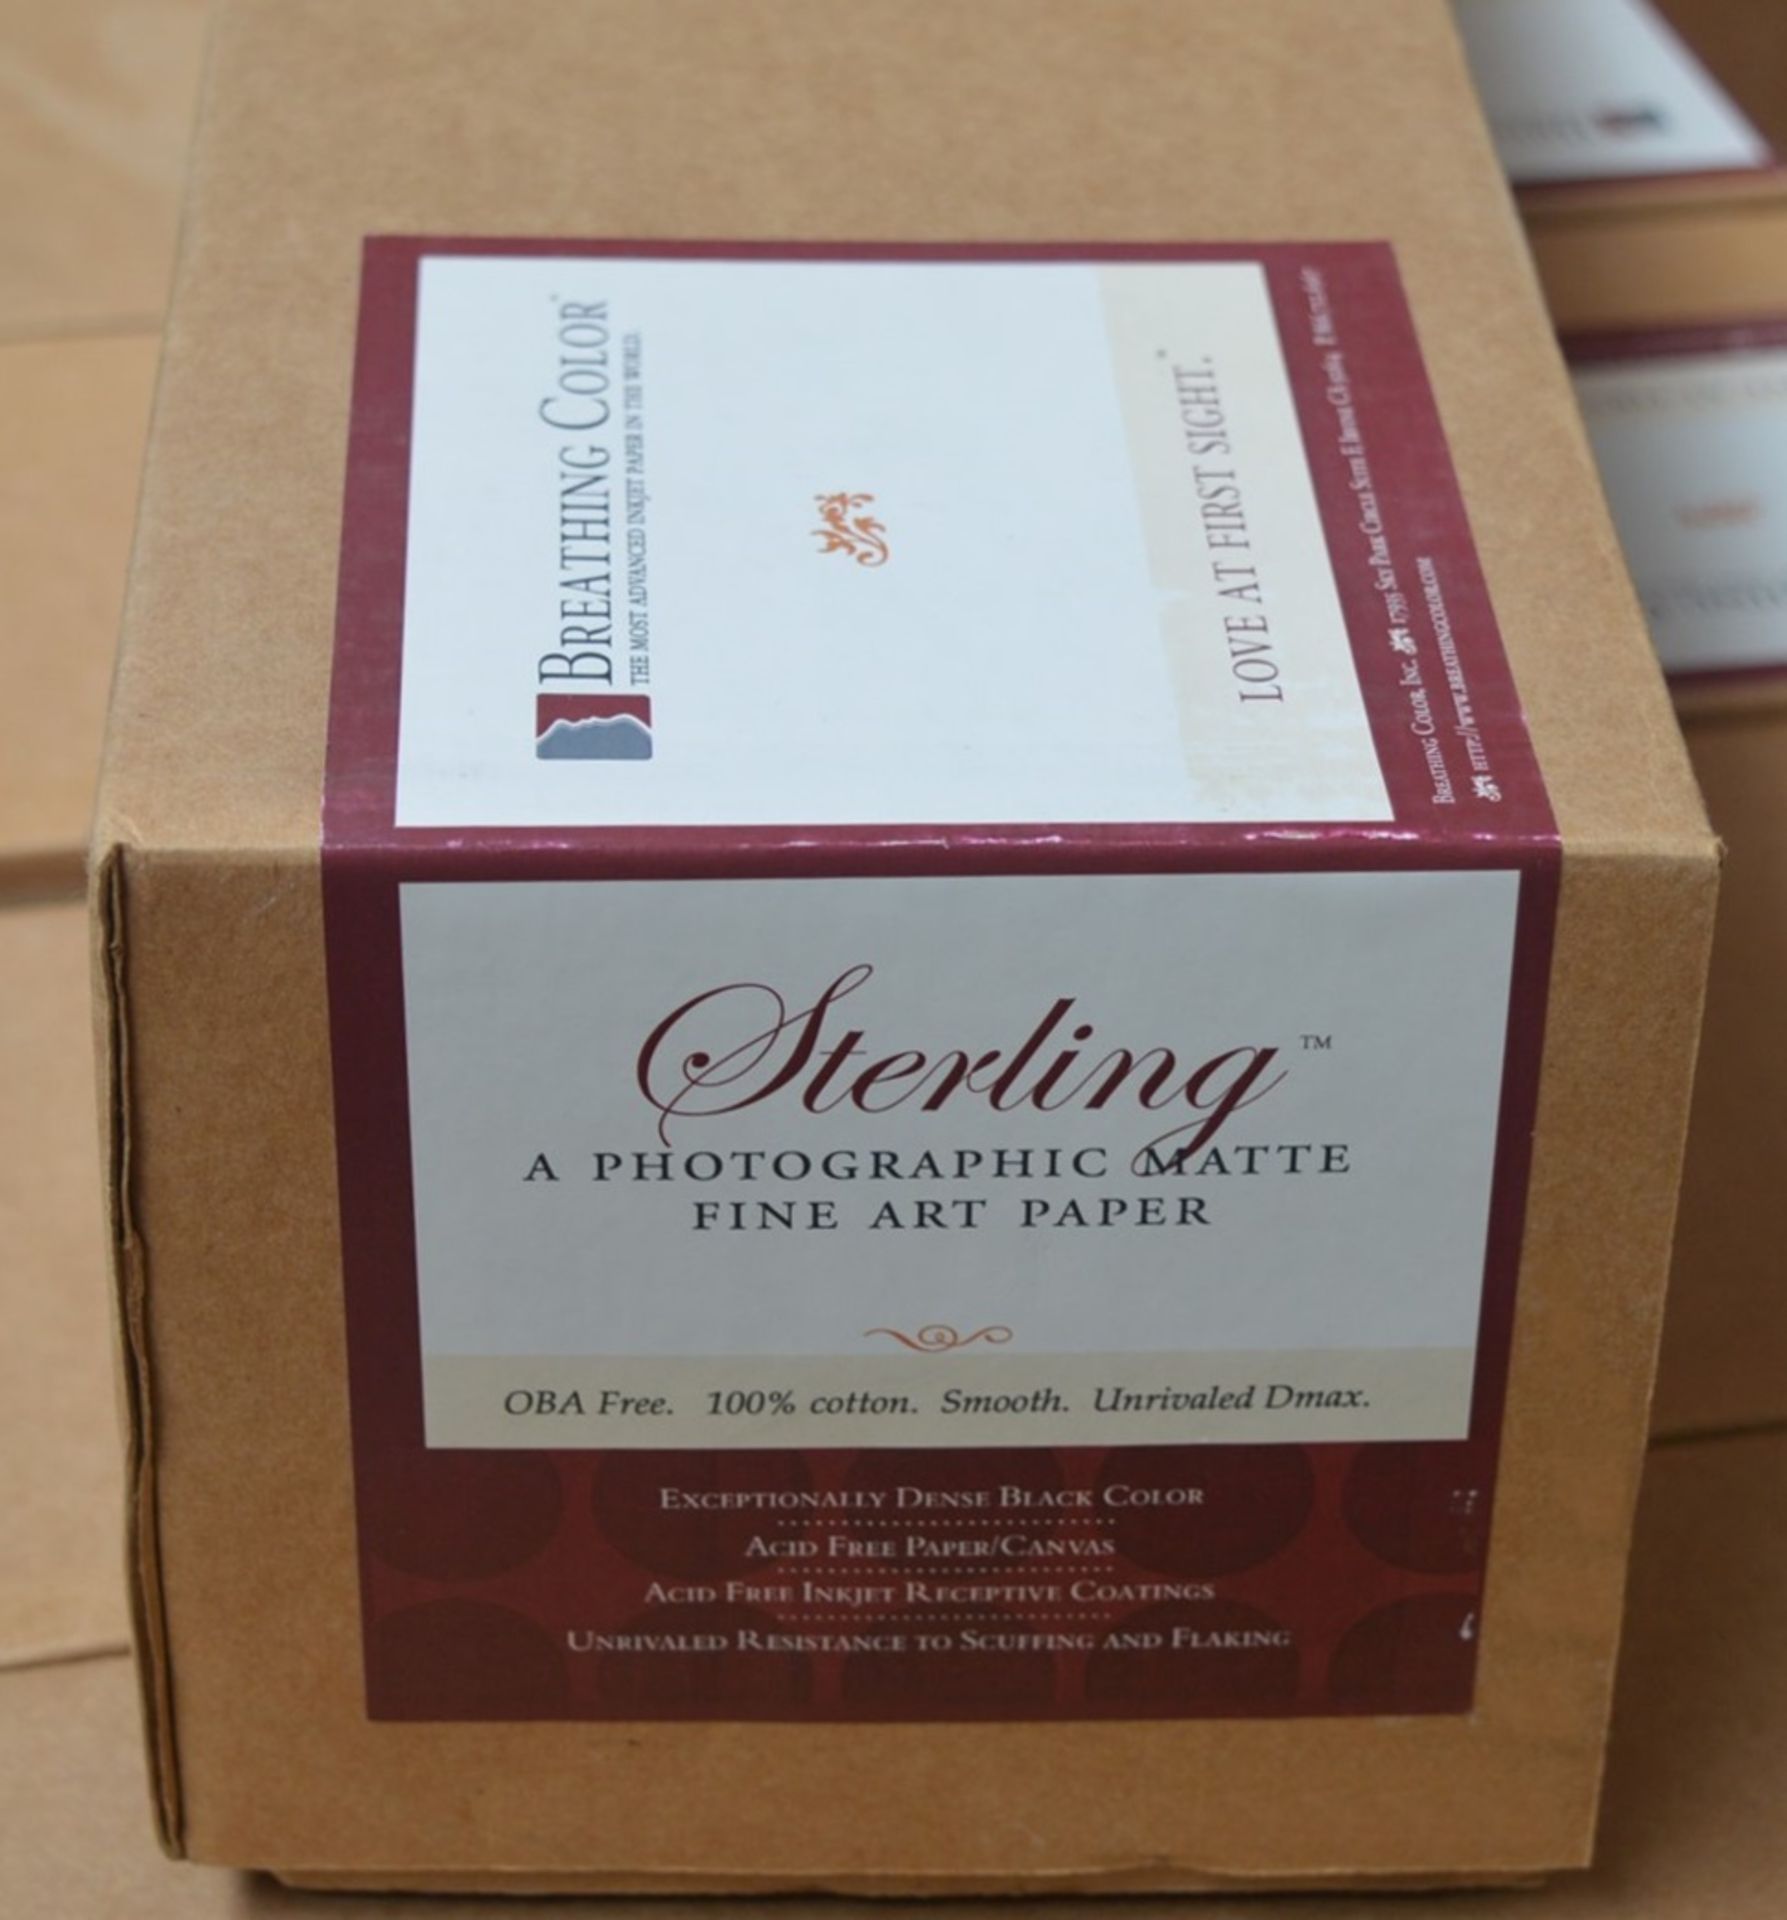 1 x Roll of Breathing Colour STERLING Photographic Matte Fine Art Paper - Size 24" x 40' - - Image 3 of 4